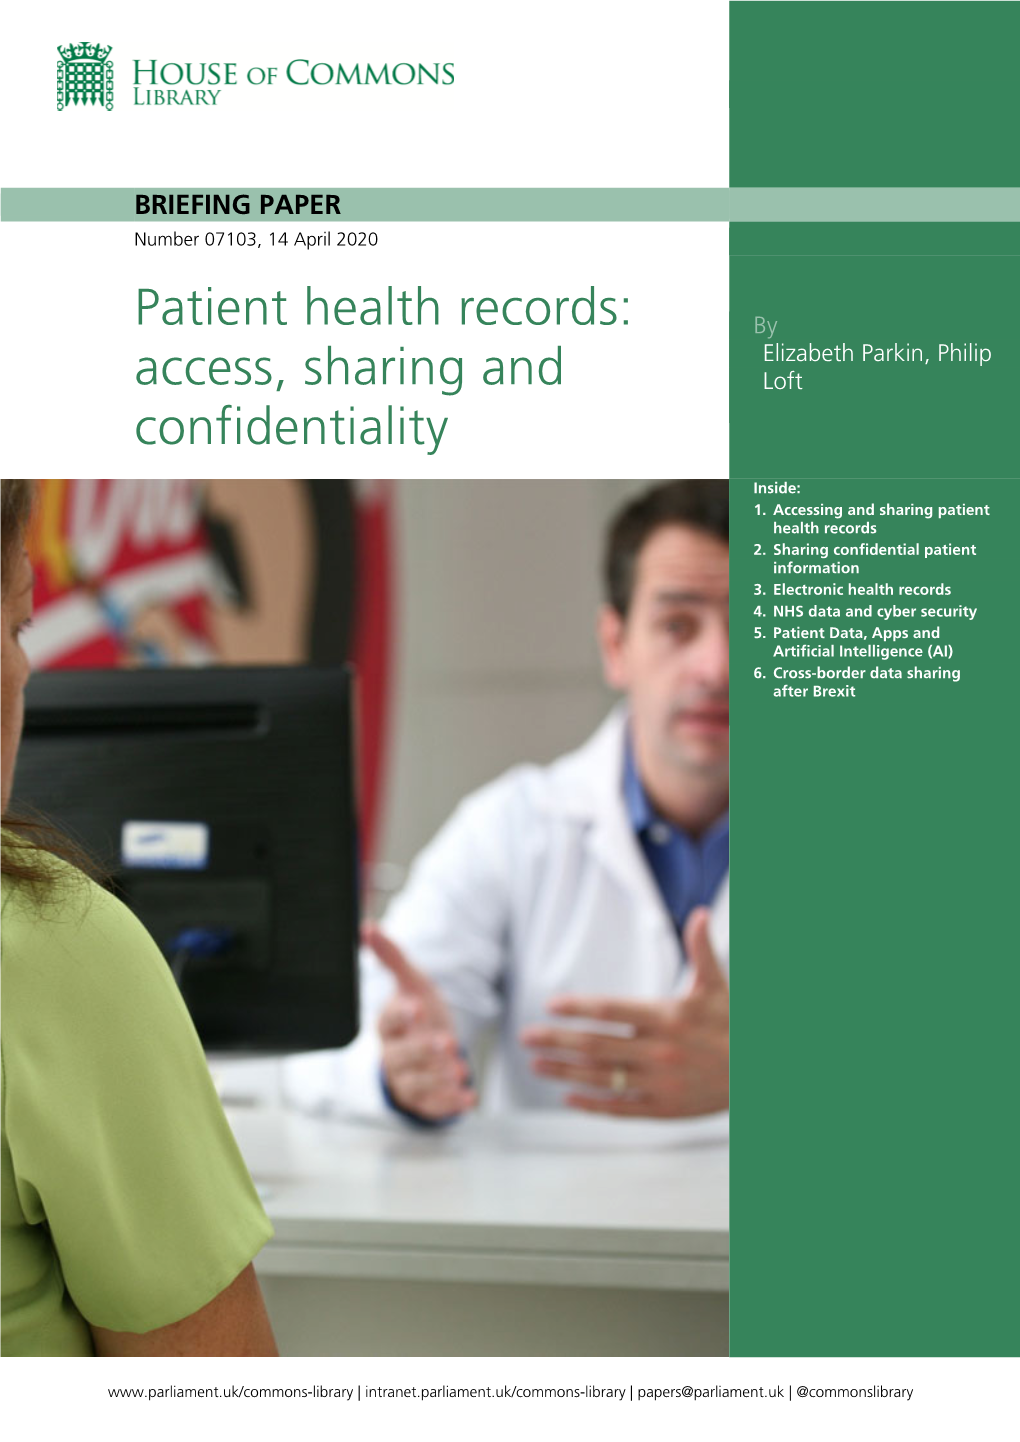 Patient Health Records: Access, Sharing and Confidentiality